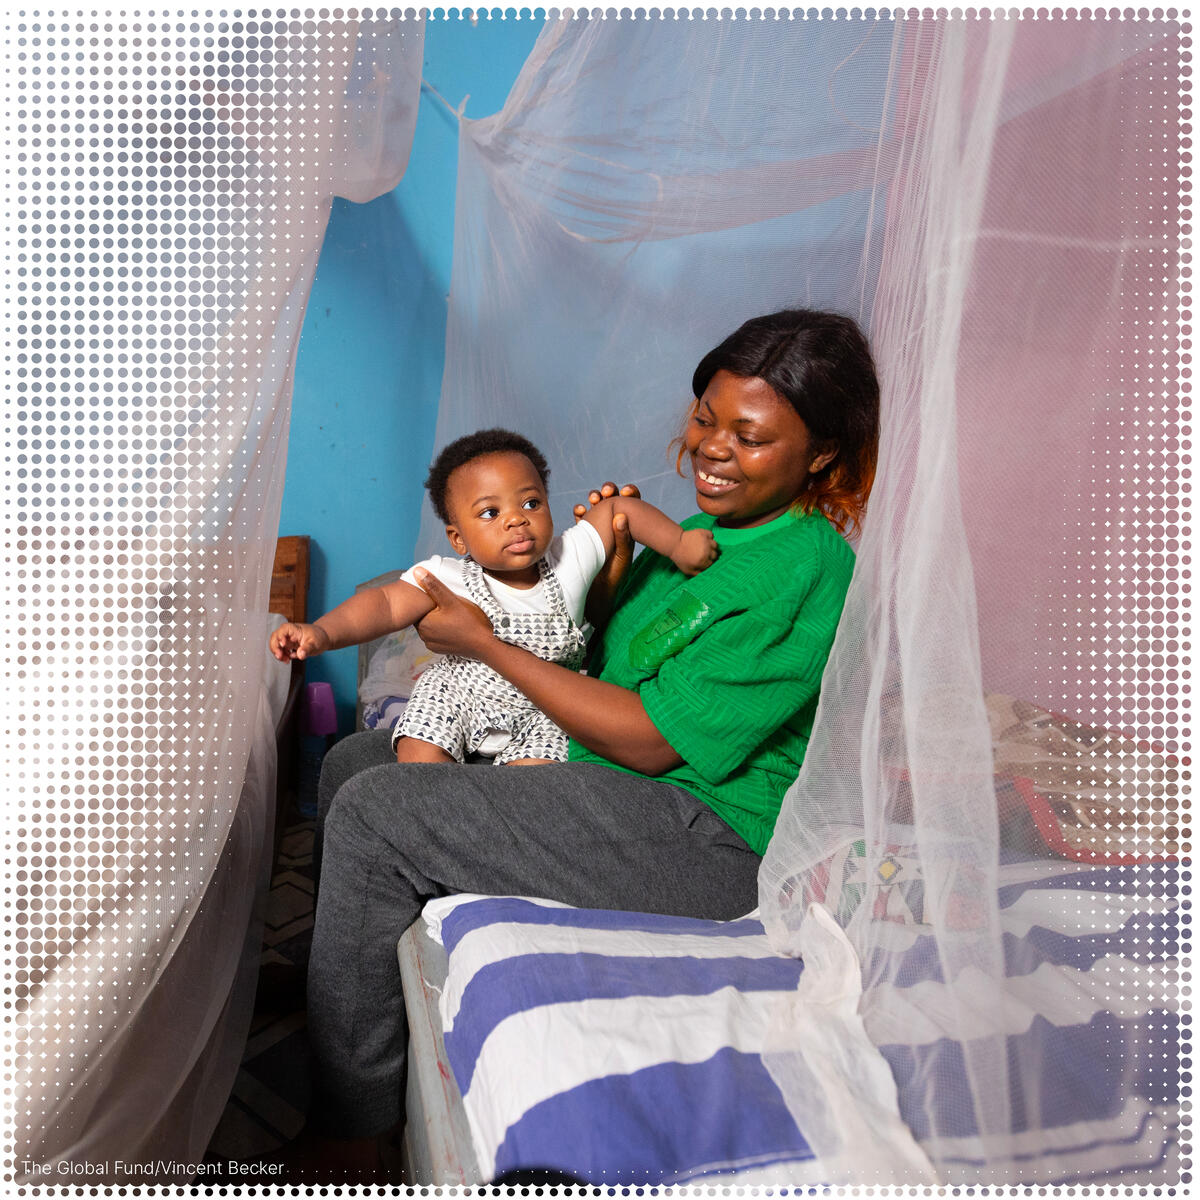 Did you know that every minute a chid dies of malaria? This #WorldMalariaDay lets affirm commitment to ensure that all people who need it have access to quality prevention tools, accessible testing & the ability to treat malaria. Let's #acceleratethefight to #EndMalaria